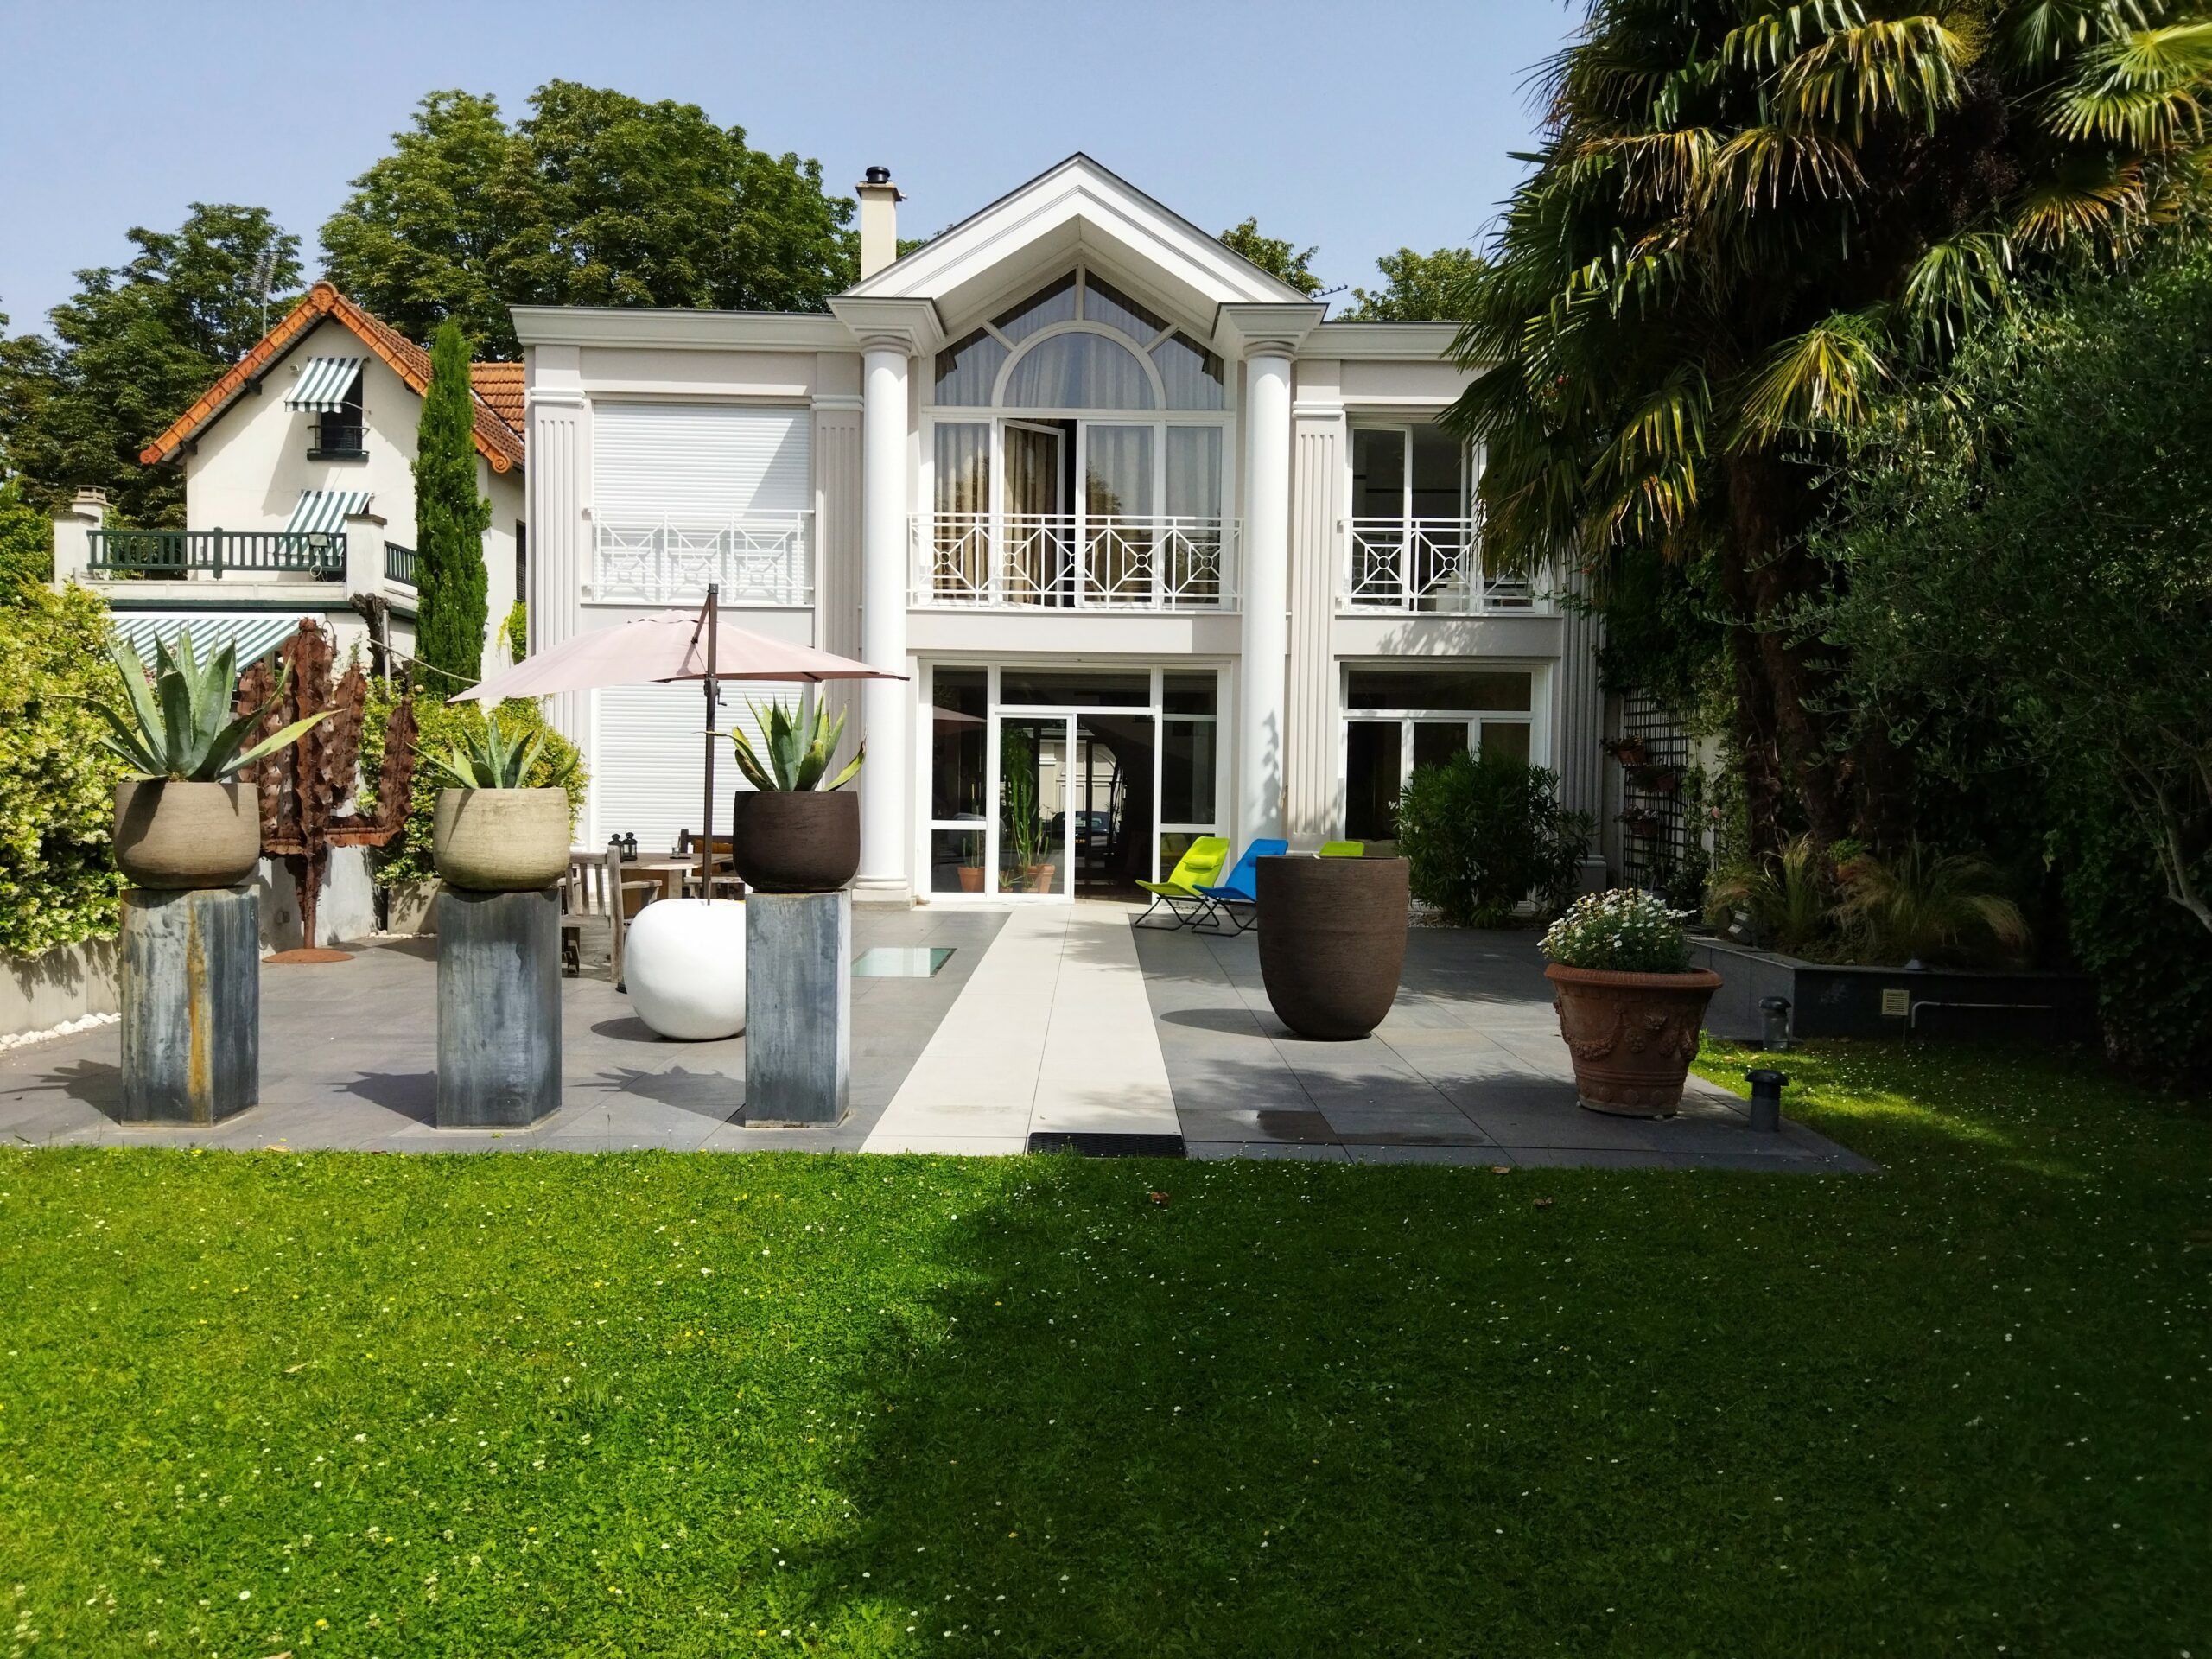 France / Nogent / Very beautiful refined residence, located in the inner eastern suburbs of Paris.